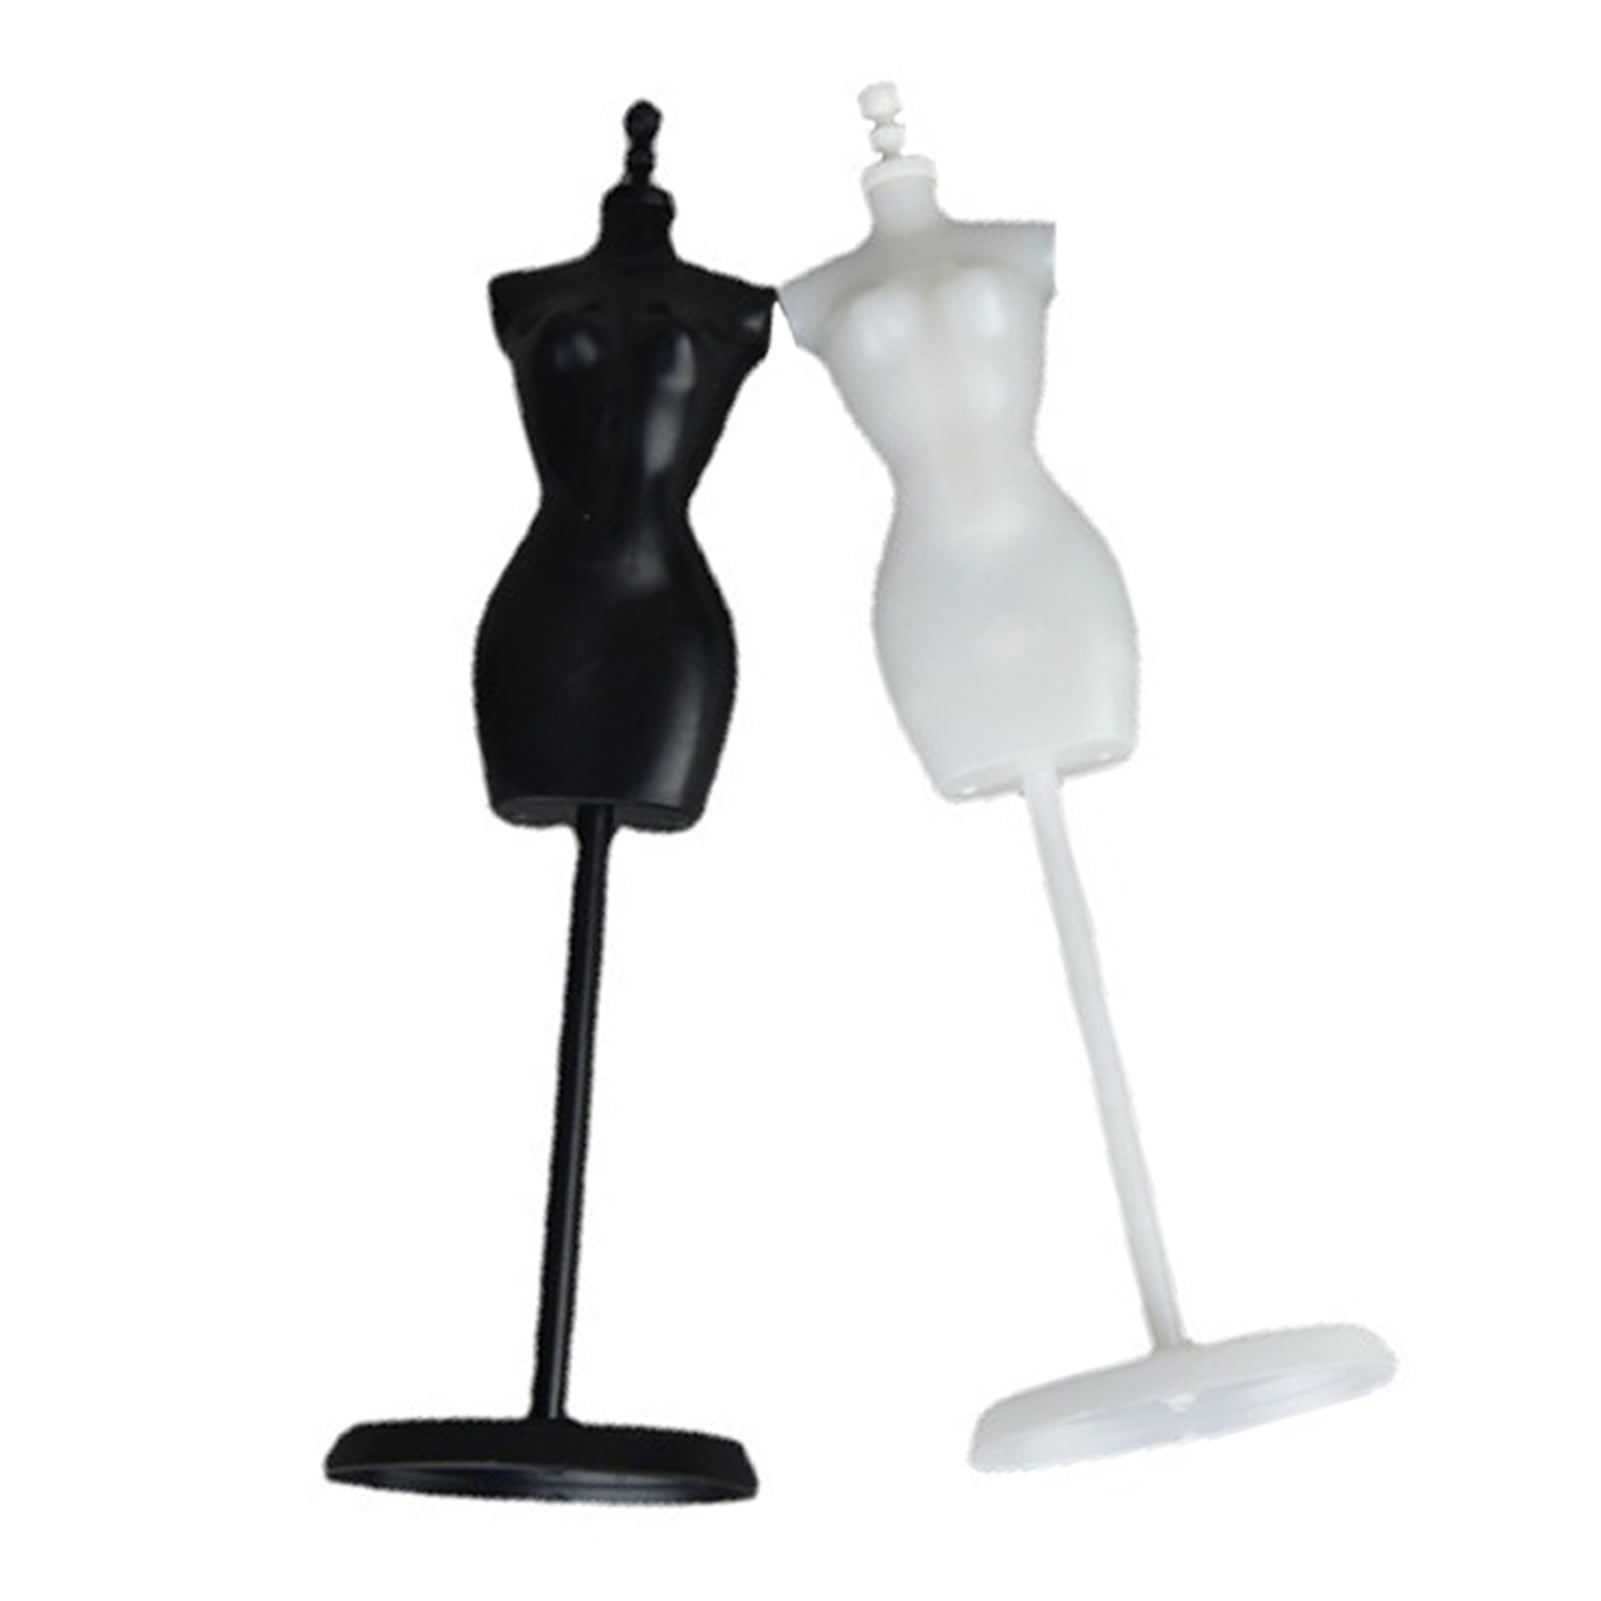 Clothes Dress Gown Outfit Mannequin Model Stand Holder Display for  DollES 